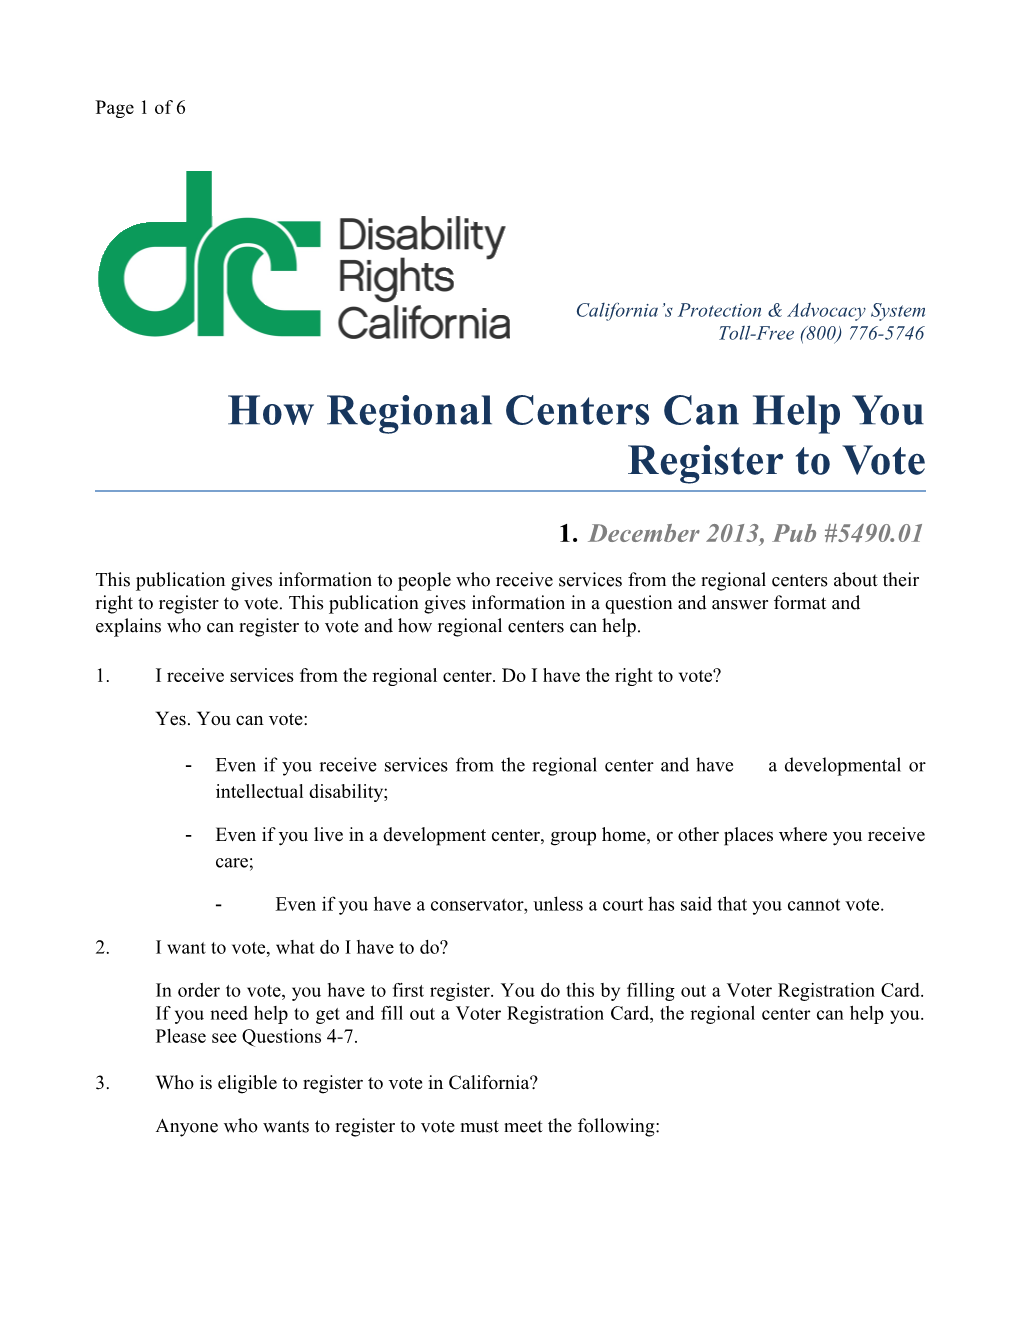 How Regional Centers Can Help You Register to Vote